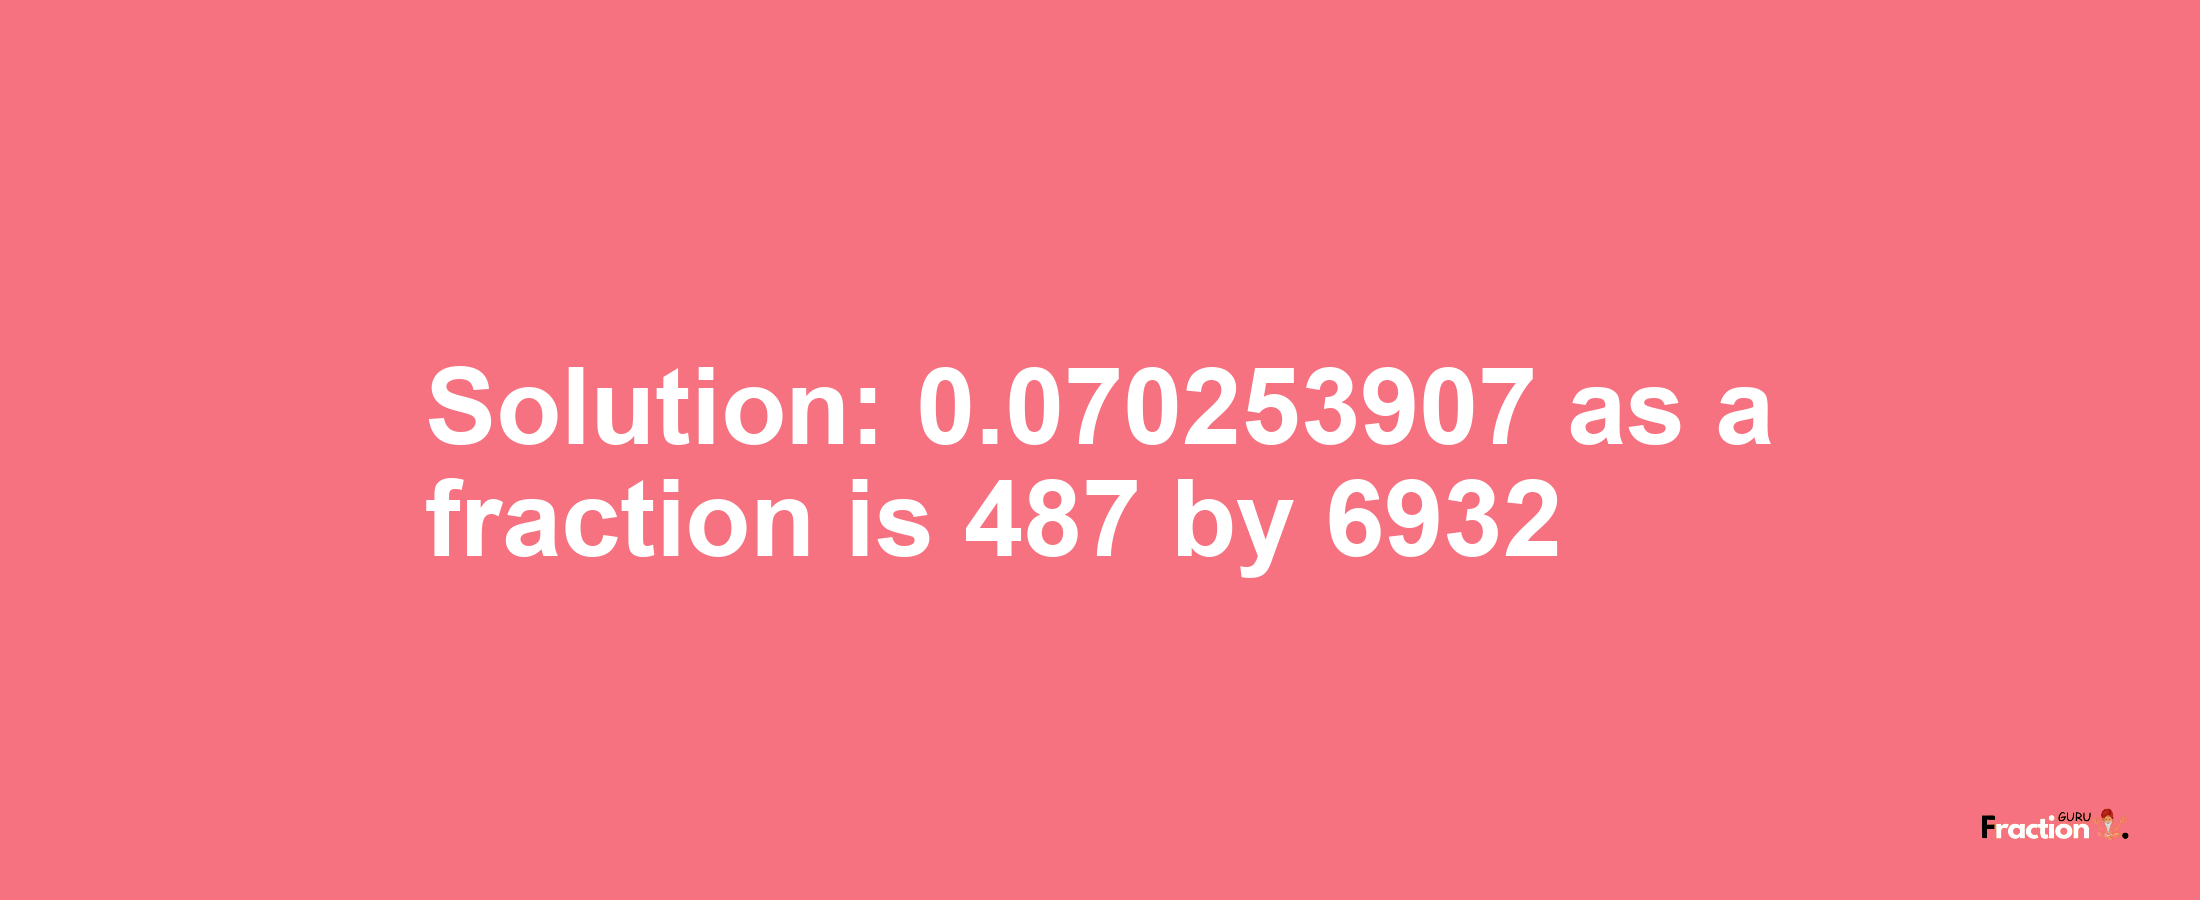 Solution:0.070253907 as a fraction is 487/6932